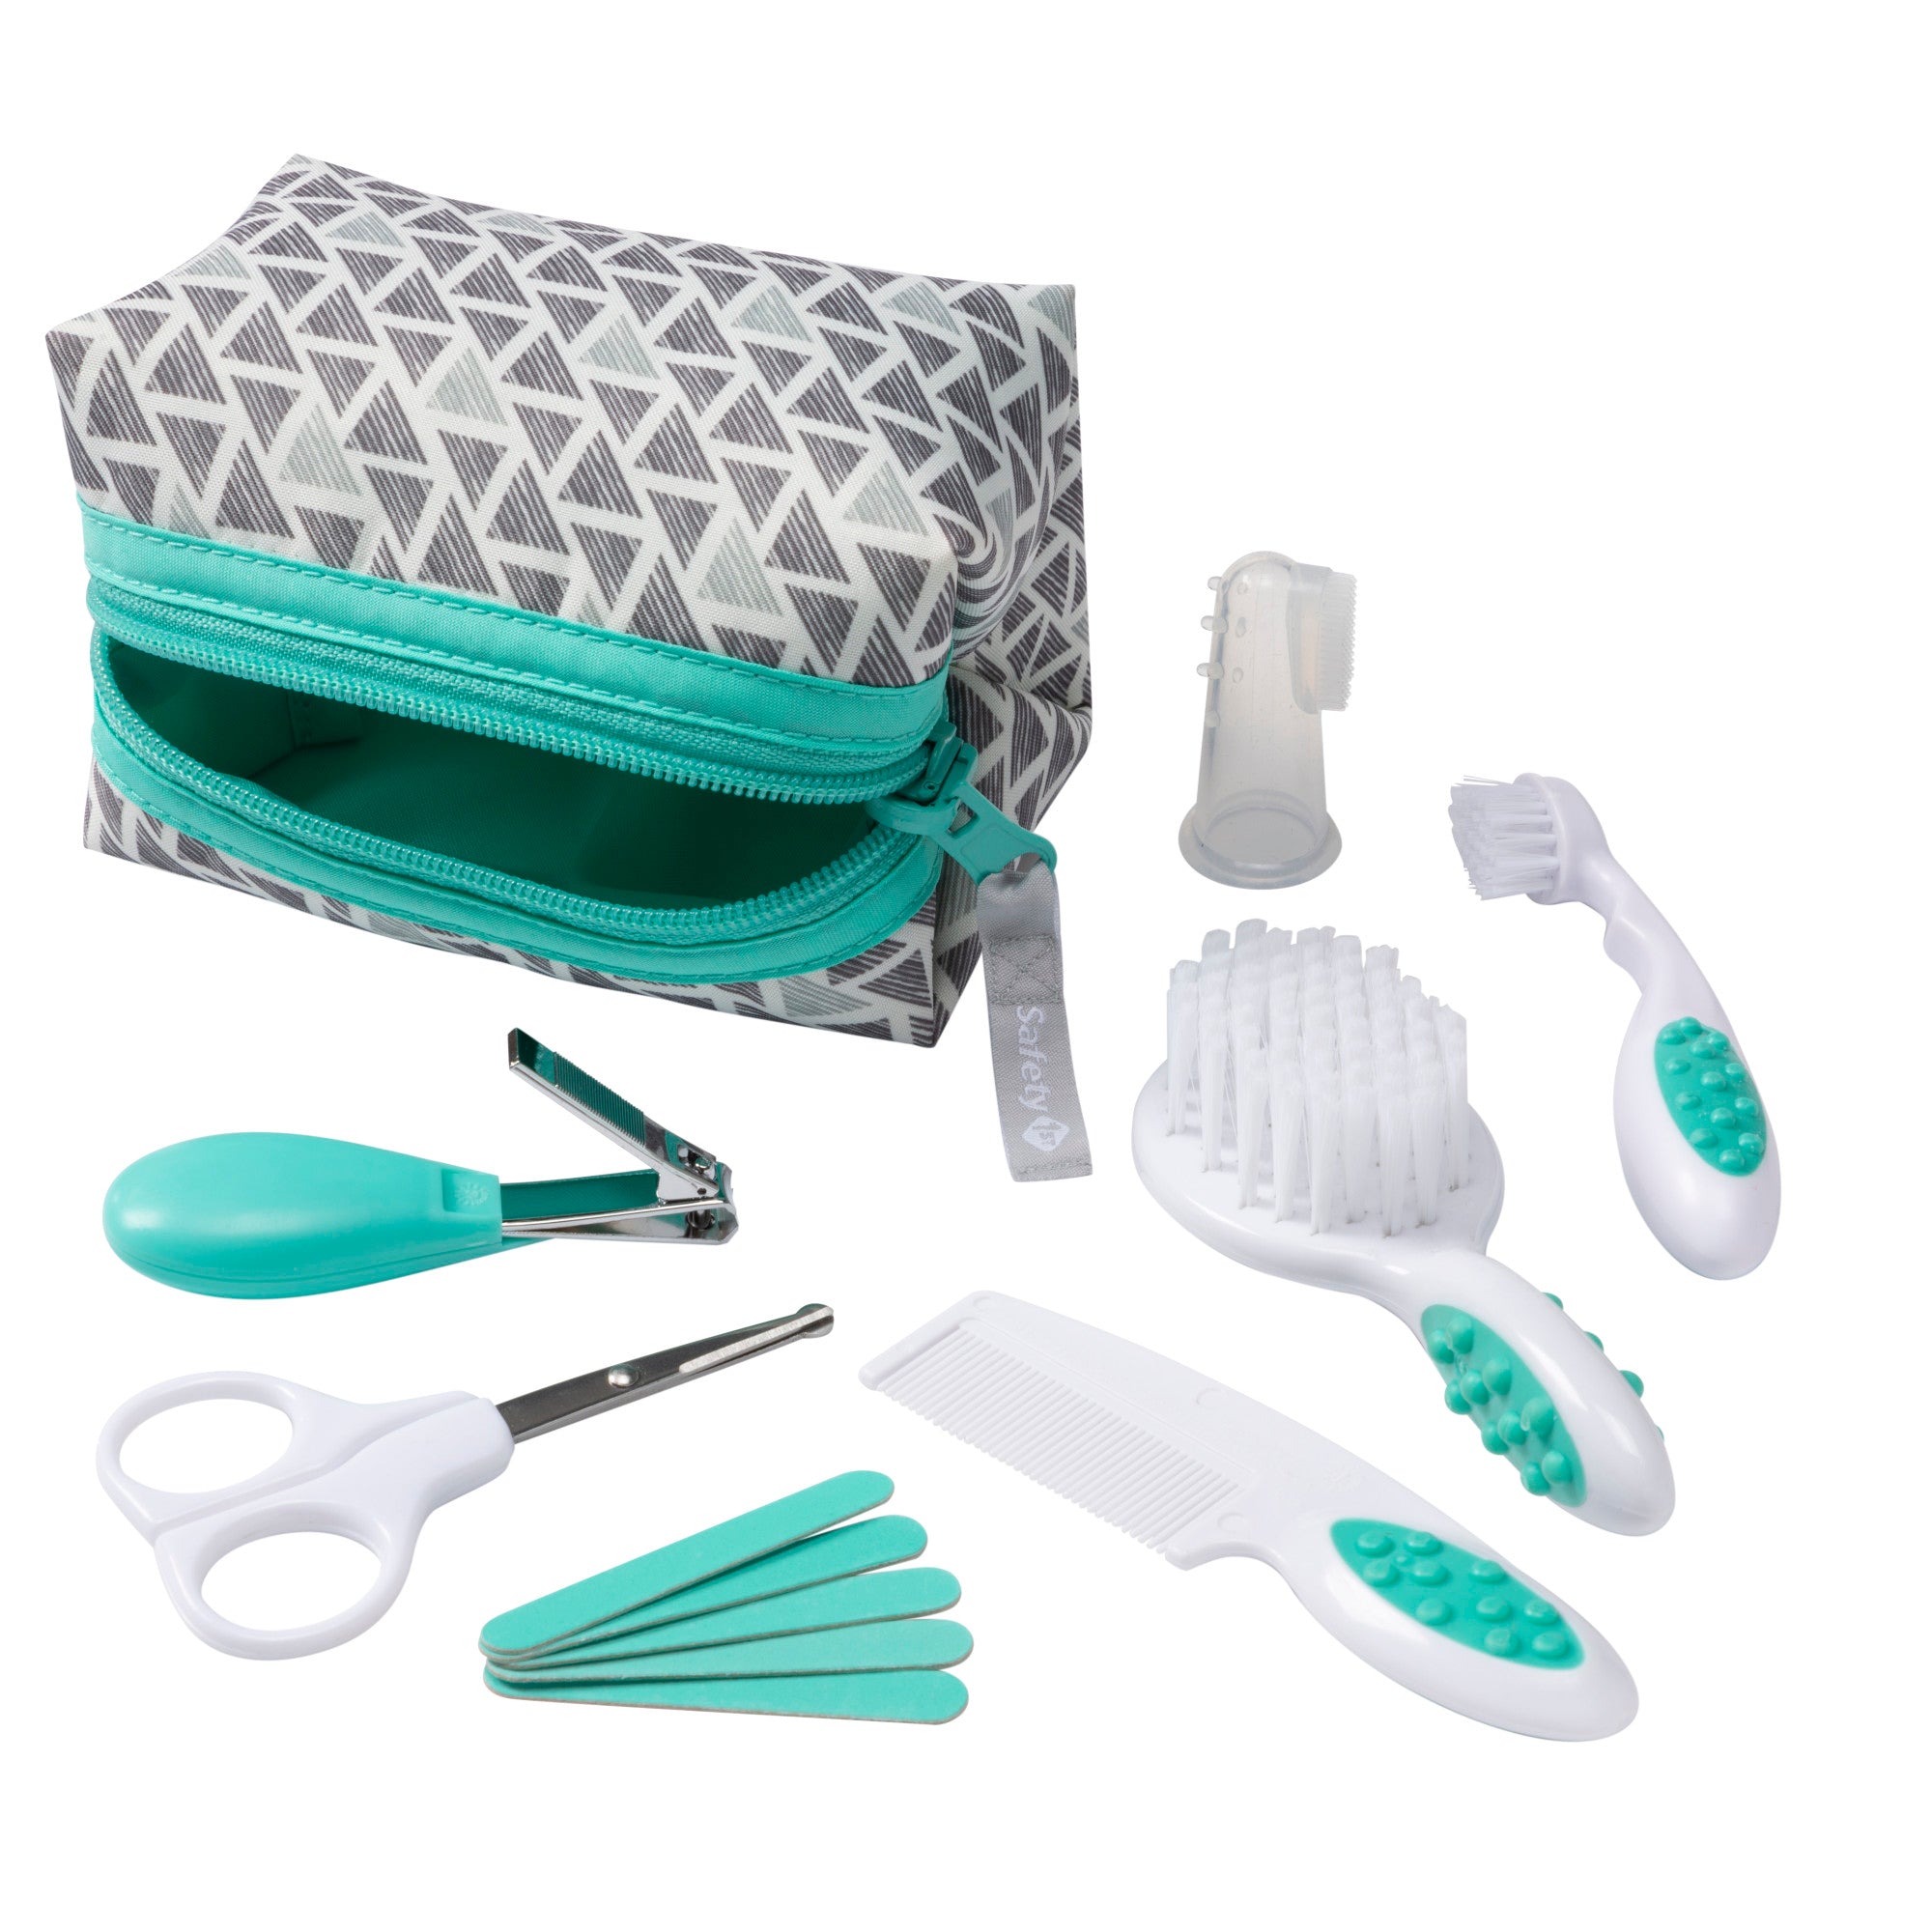 Safety 1st Groom and Go Baby Care Kit in Seafoam